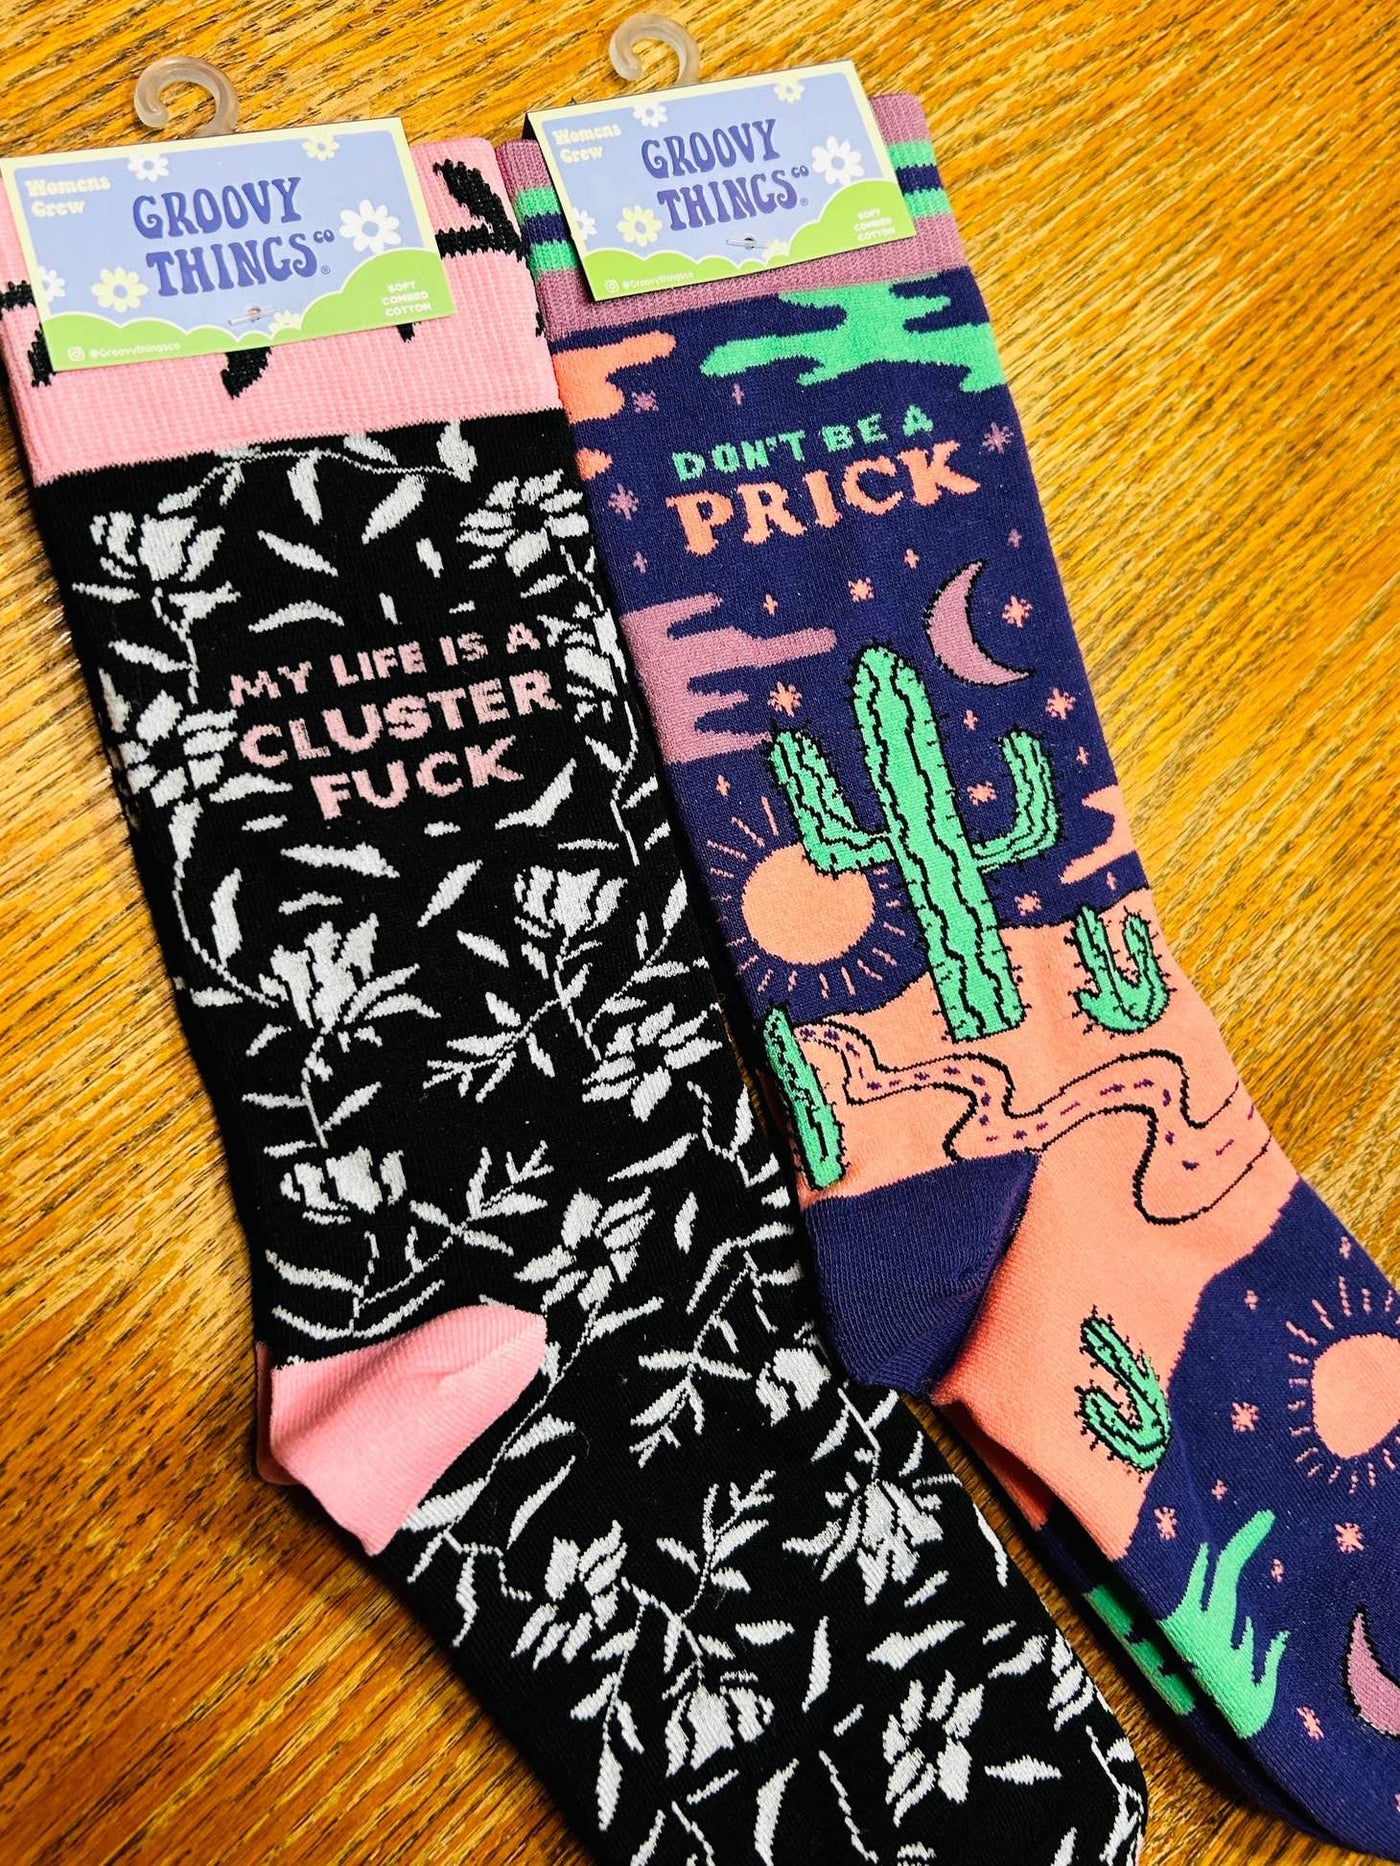 My Life is a Cluster Fuck, Womens Crew - Groovy Things - The Sock Monster